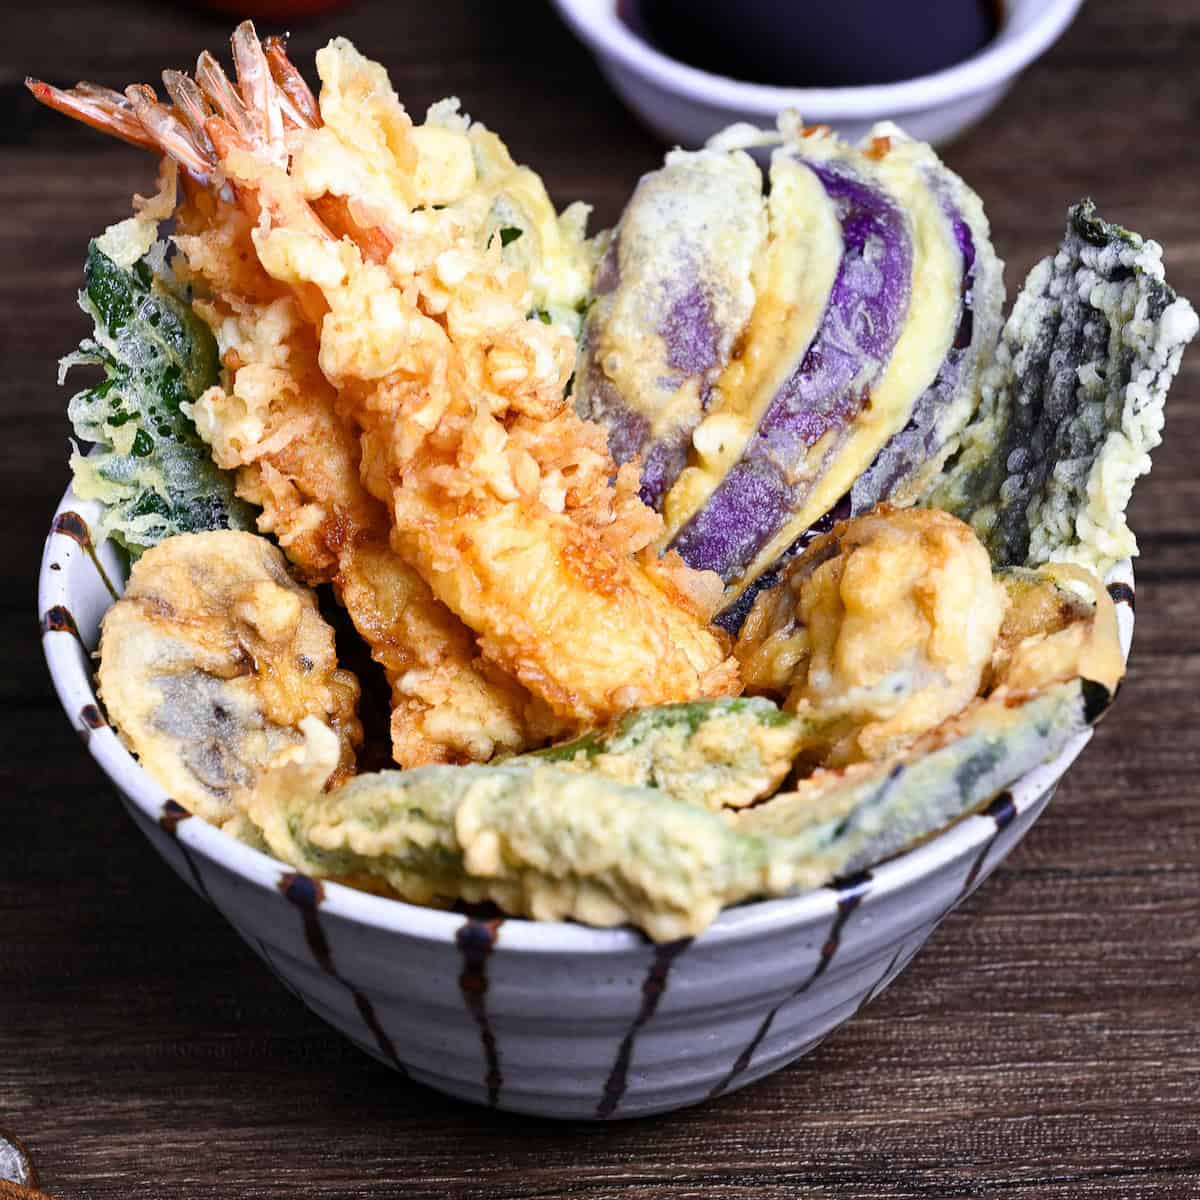 Tendon (Tempura Rice Bowl) made with shrimp and a variety of vegetables in a striped bowl on a wooden surface with homemade sauce in the background